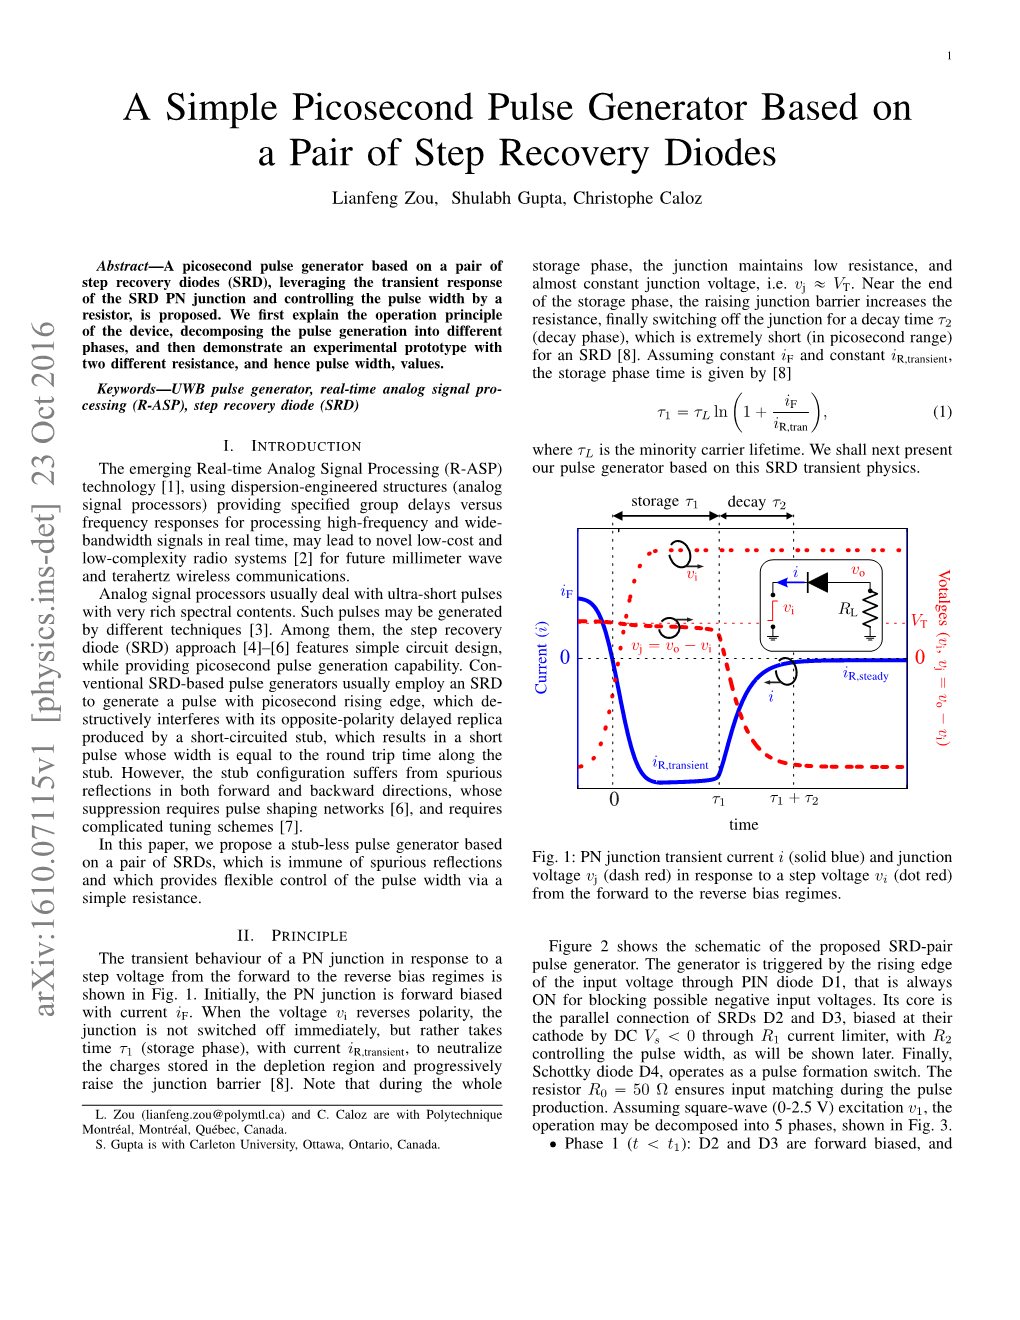 A Simple Picosecond Pulse Generator Based on a Pair of Step Recovery Diodes Lianfeng Zou, Shulabh Gupta, Christophe Caloz